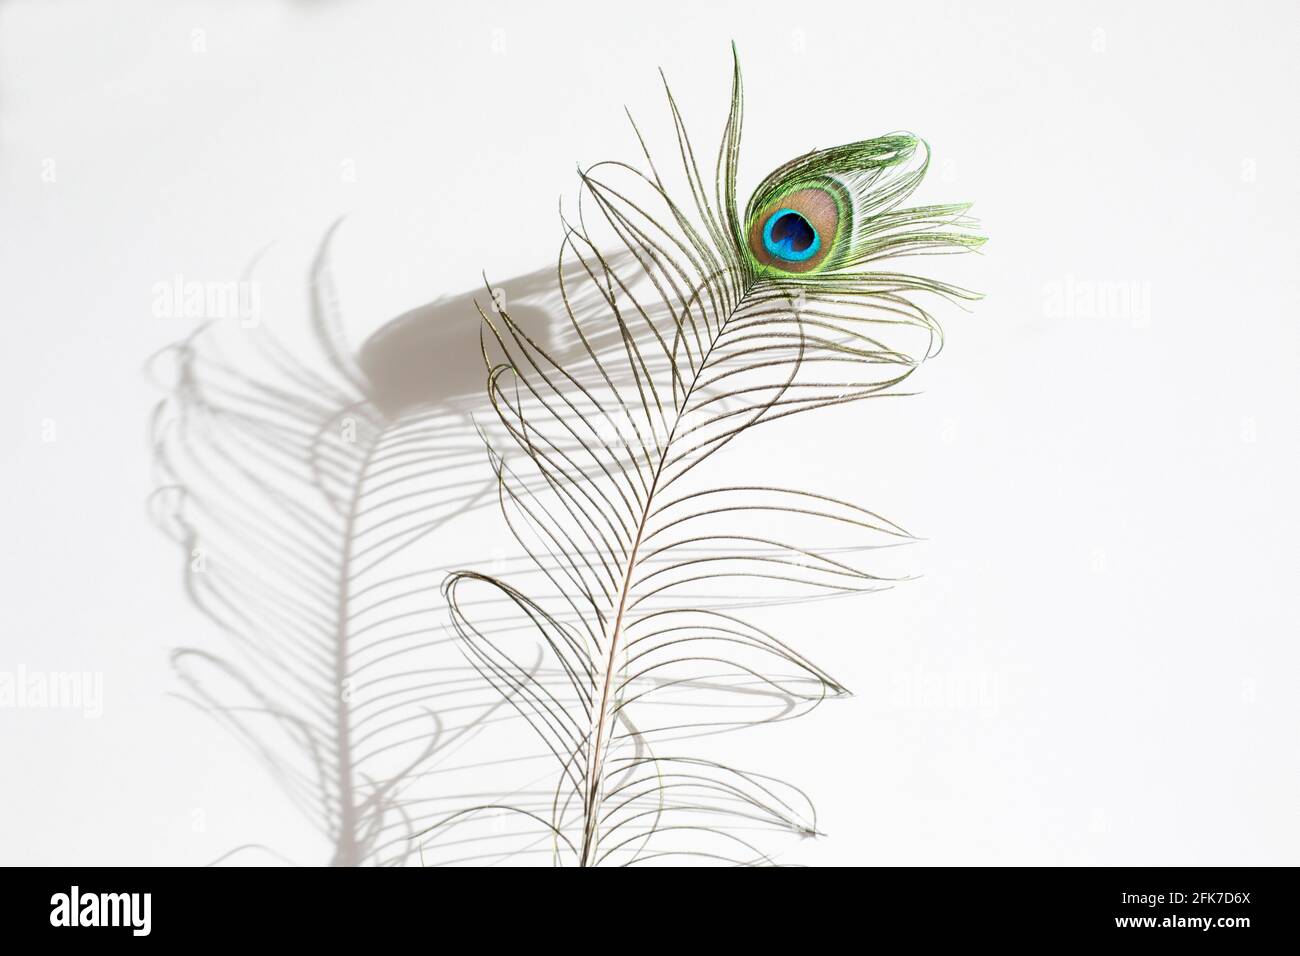 single peacock feather and the shadow on white background Stock Photo